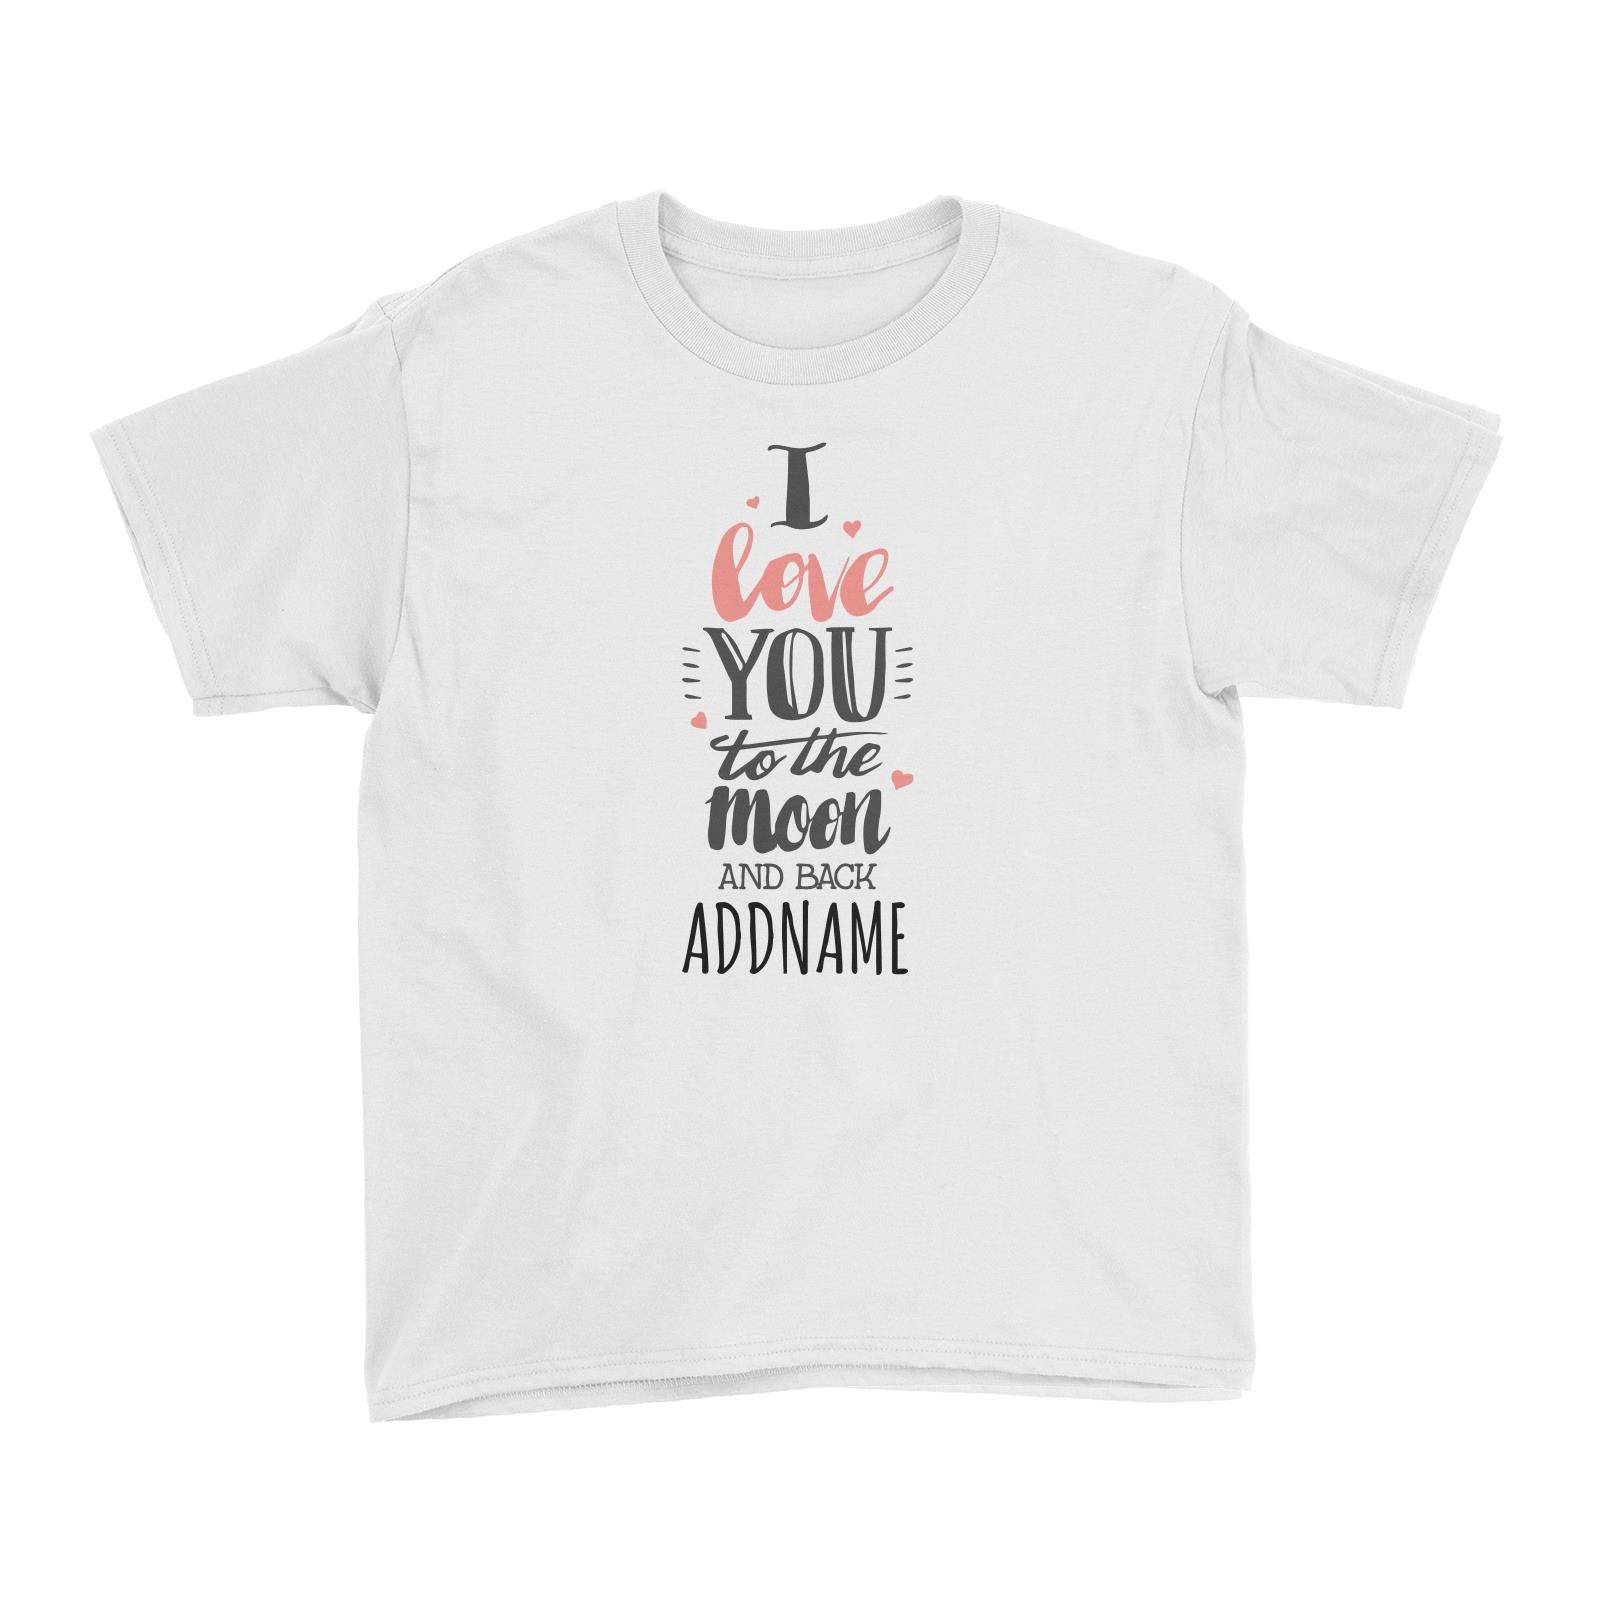 I Love You to the Moon and Back Doodle Phrase White White Kid's T-Shirt  Matching Family Personalizable Designs